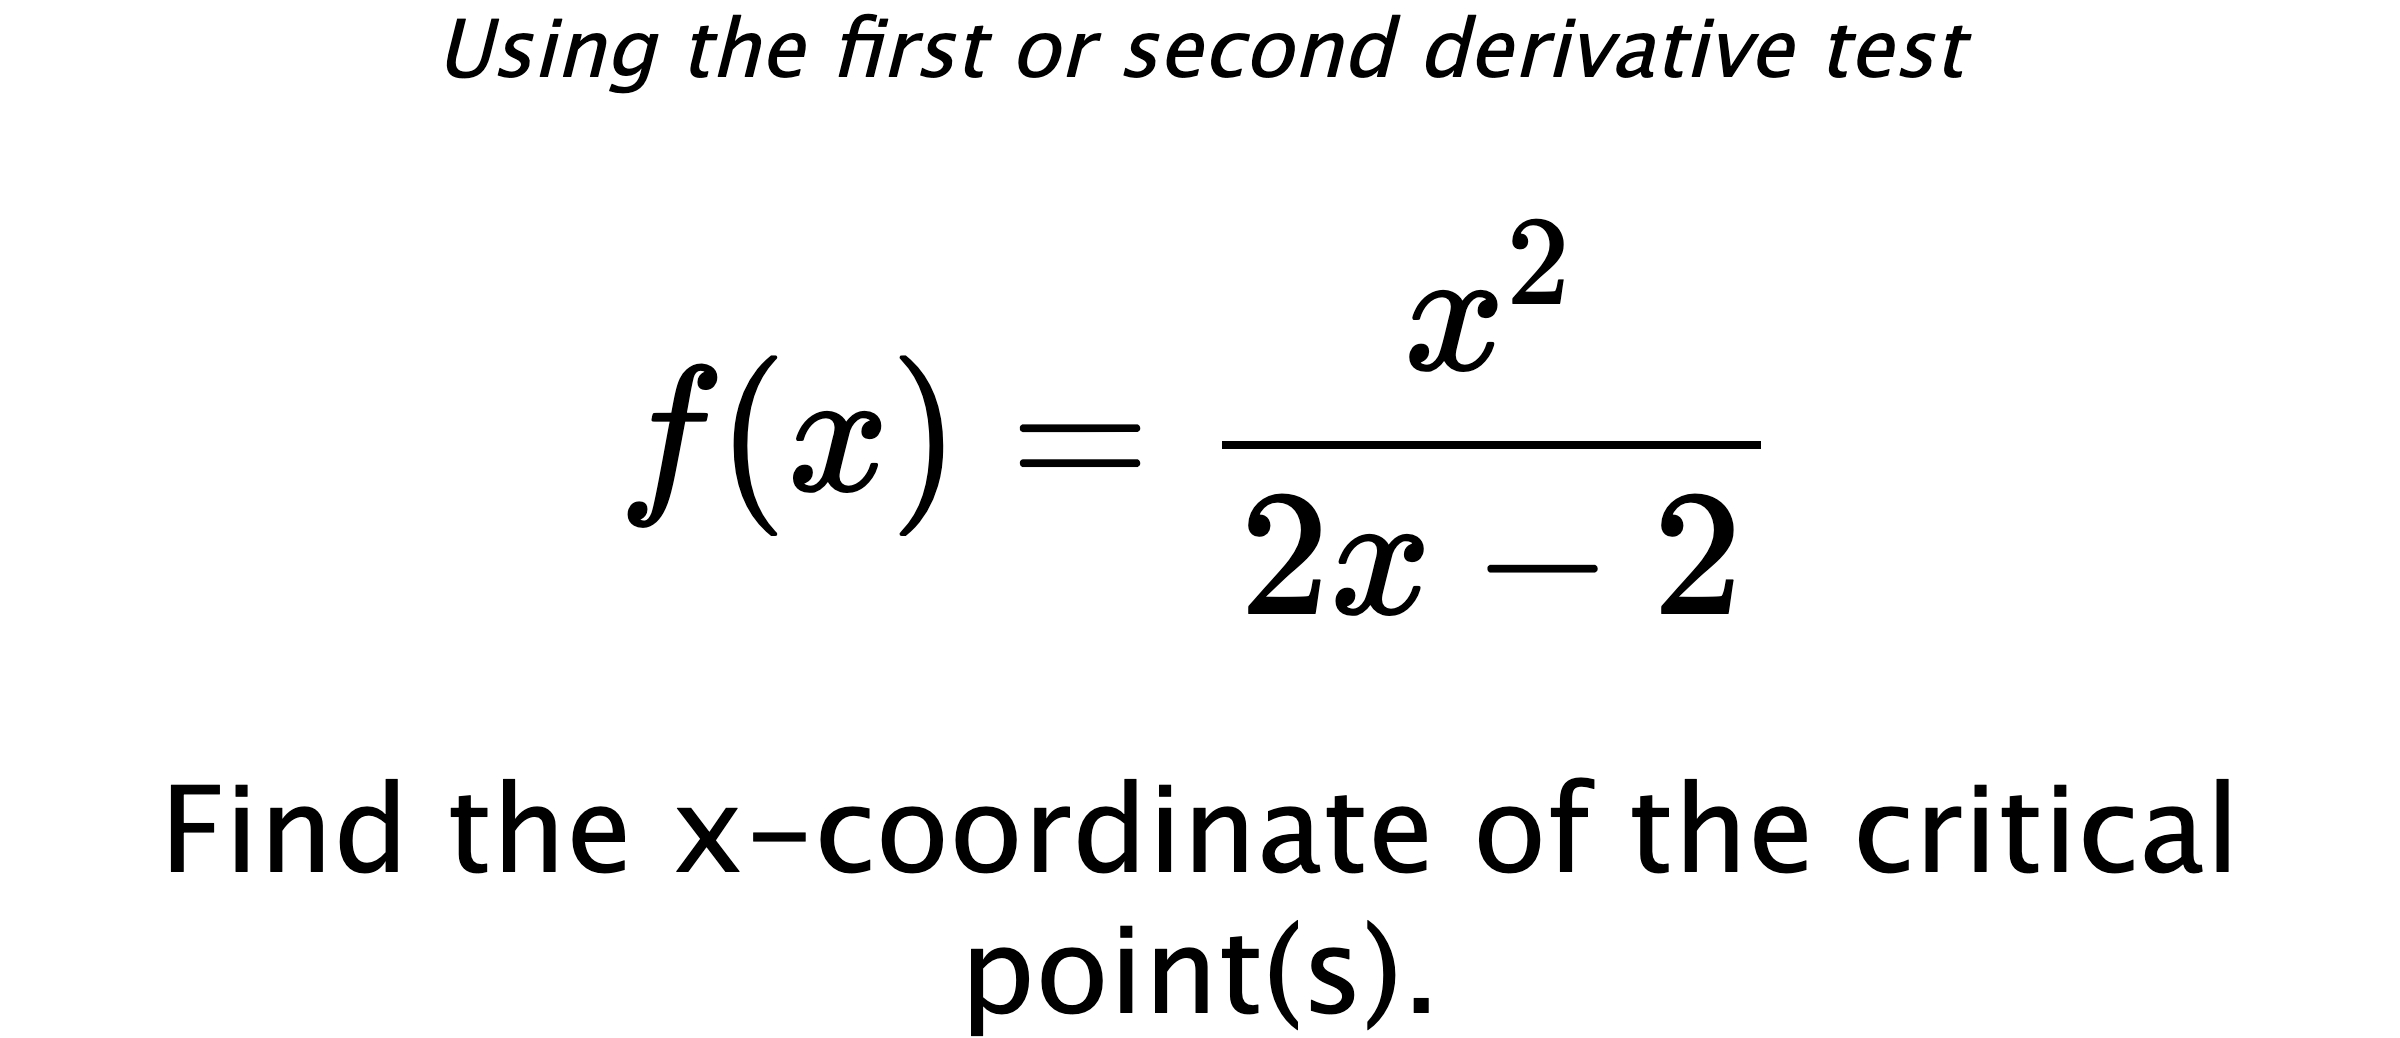 Using the first or second derivative test $$ f(x)=\frac{x^2}{2x-2} $$ Find the x-coordinate of the critical point(s).